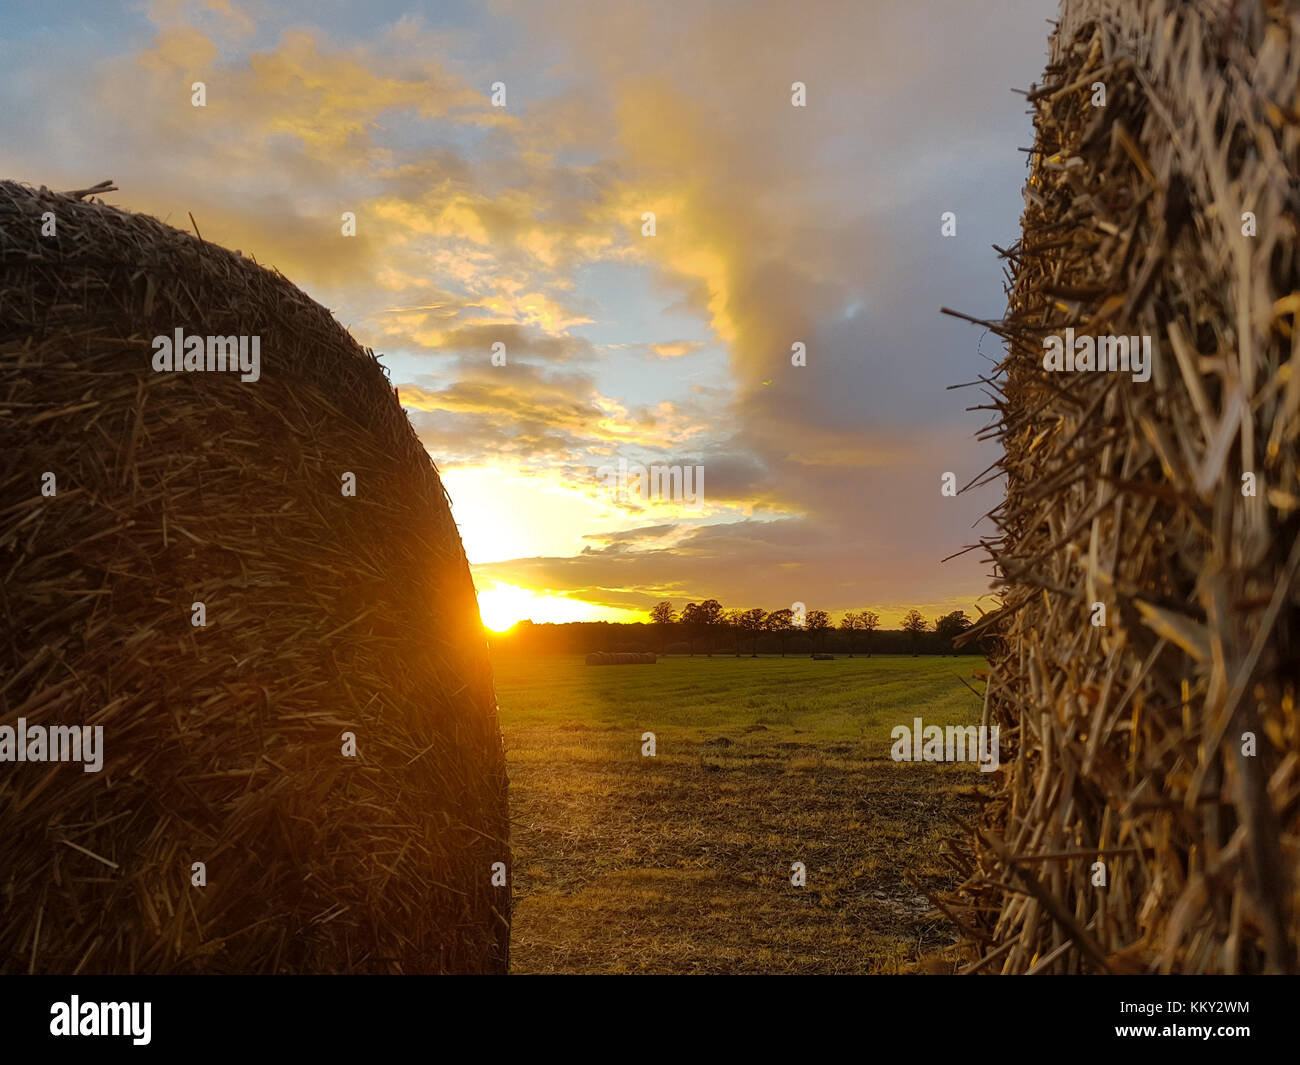 Straw bale in the sunset after harvest Stock Photo